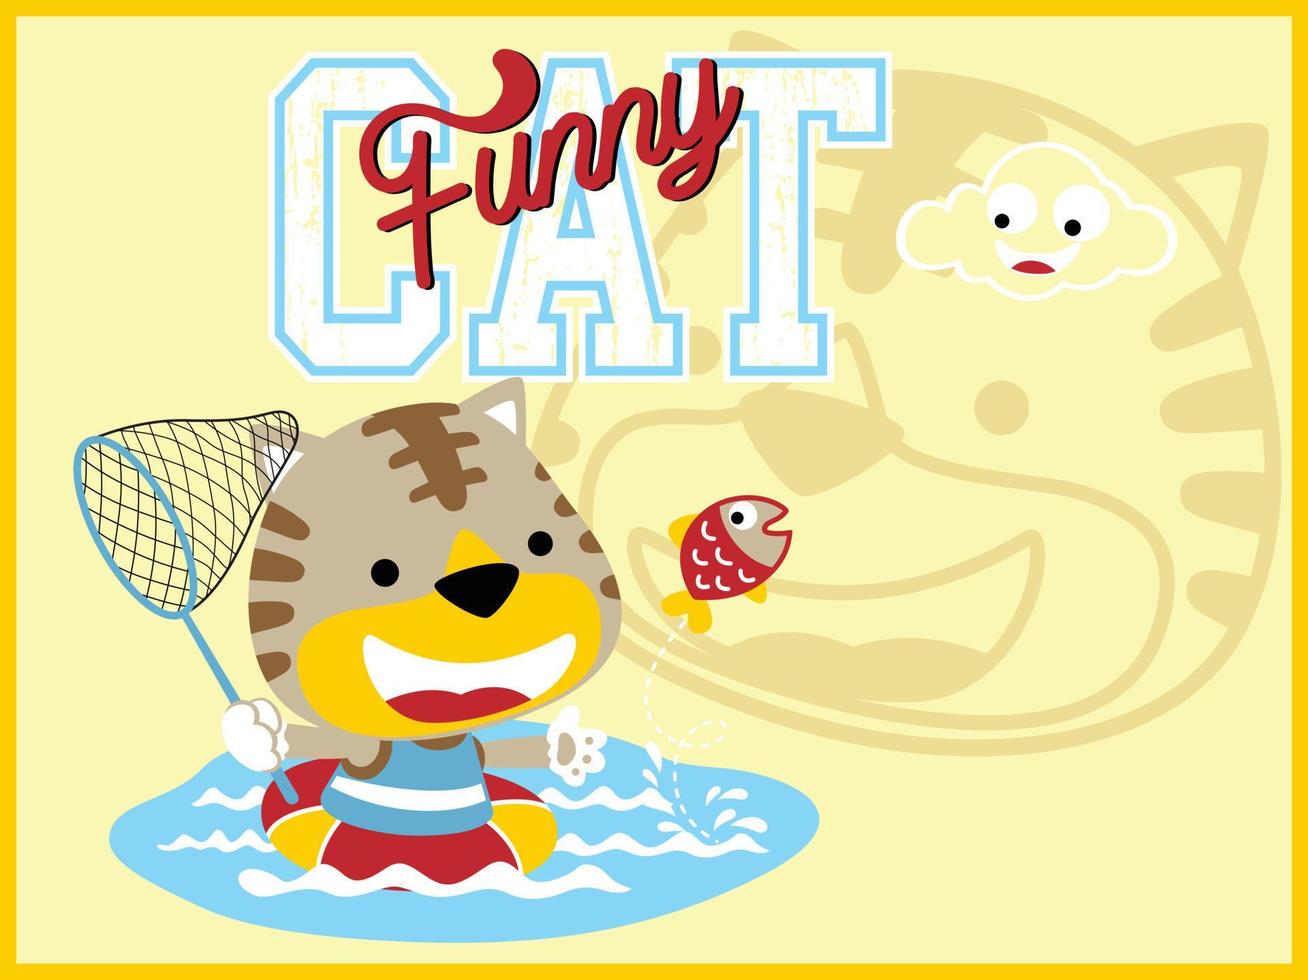 Funny cat cartoon vector catching fish with fishing net